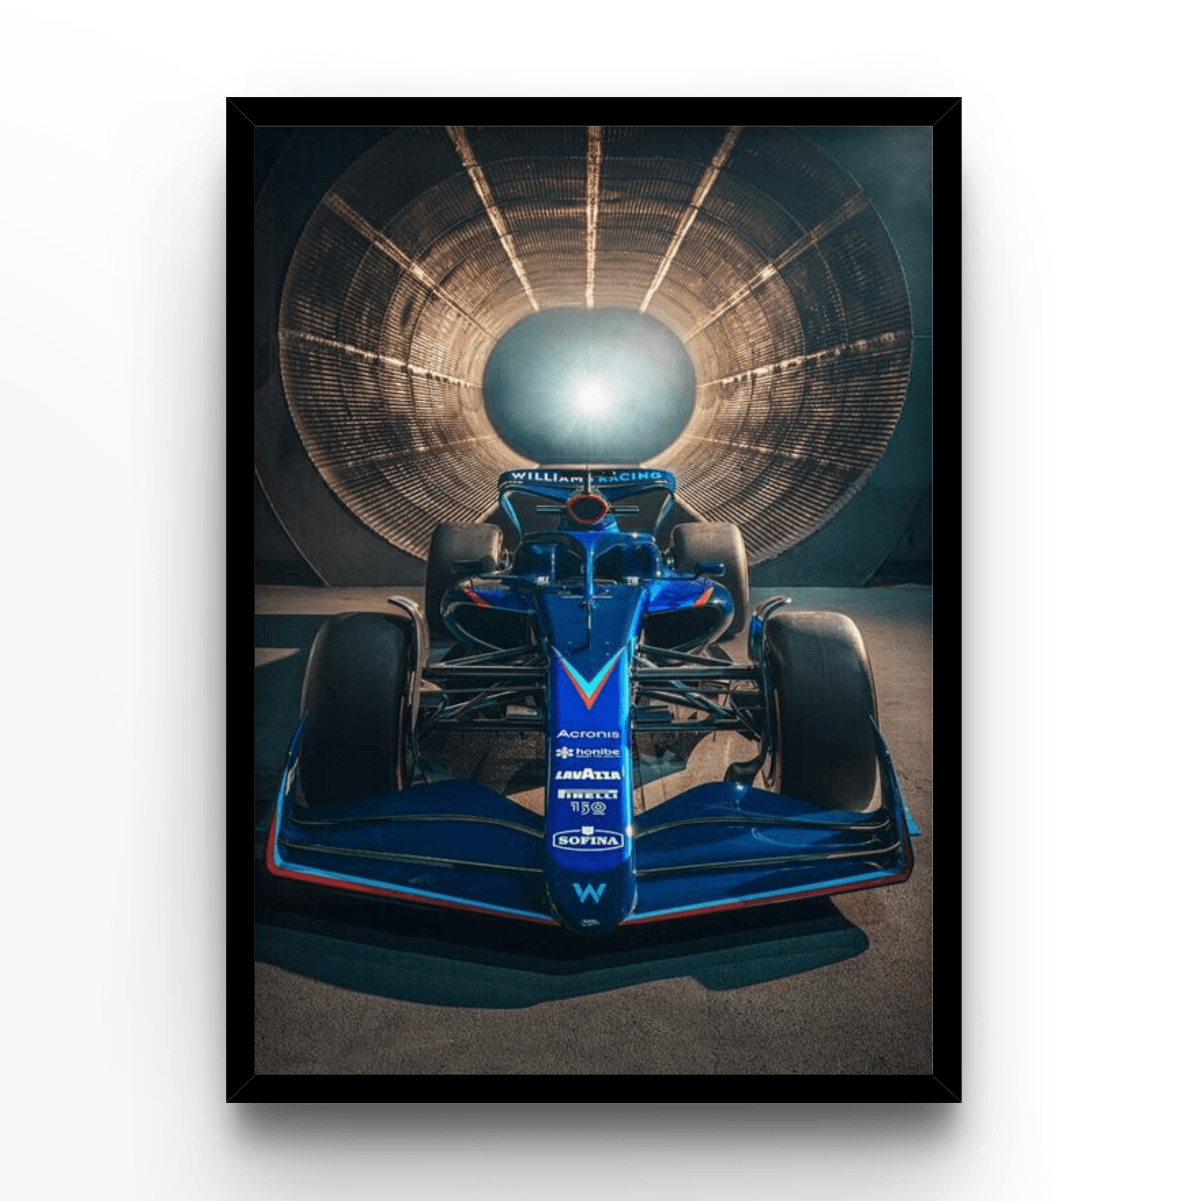 William Racing F1 - A4, A3, A2 Posters Base - Poster Print Shop / Art Prints / PostersBase